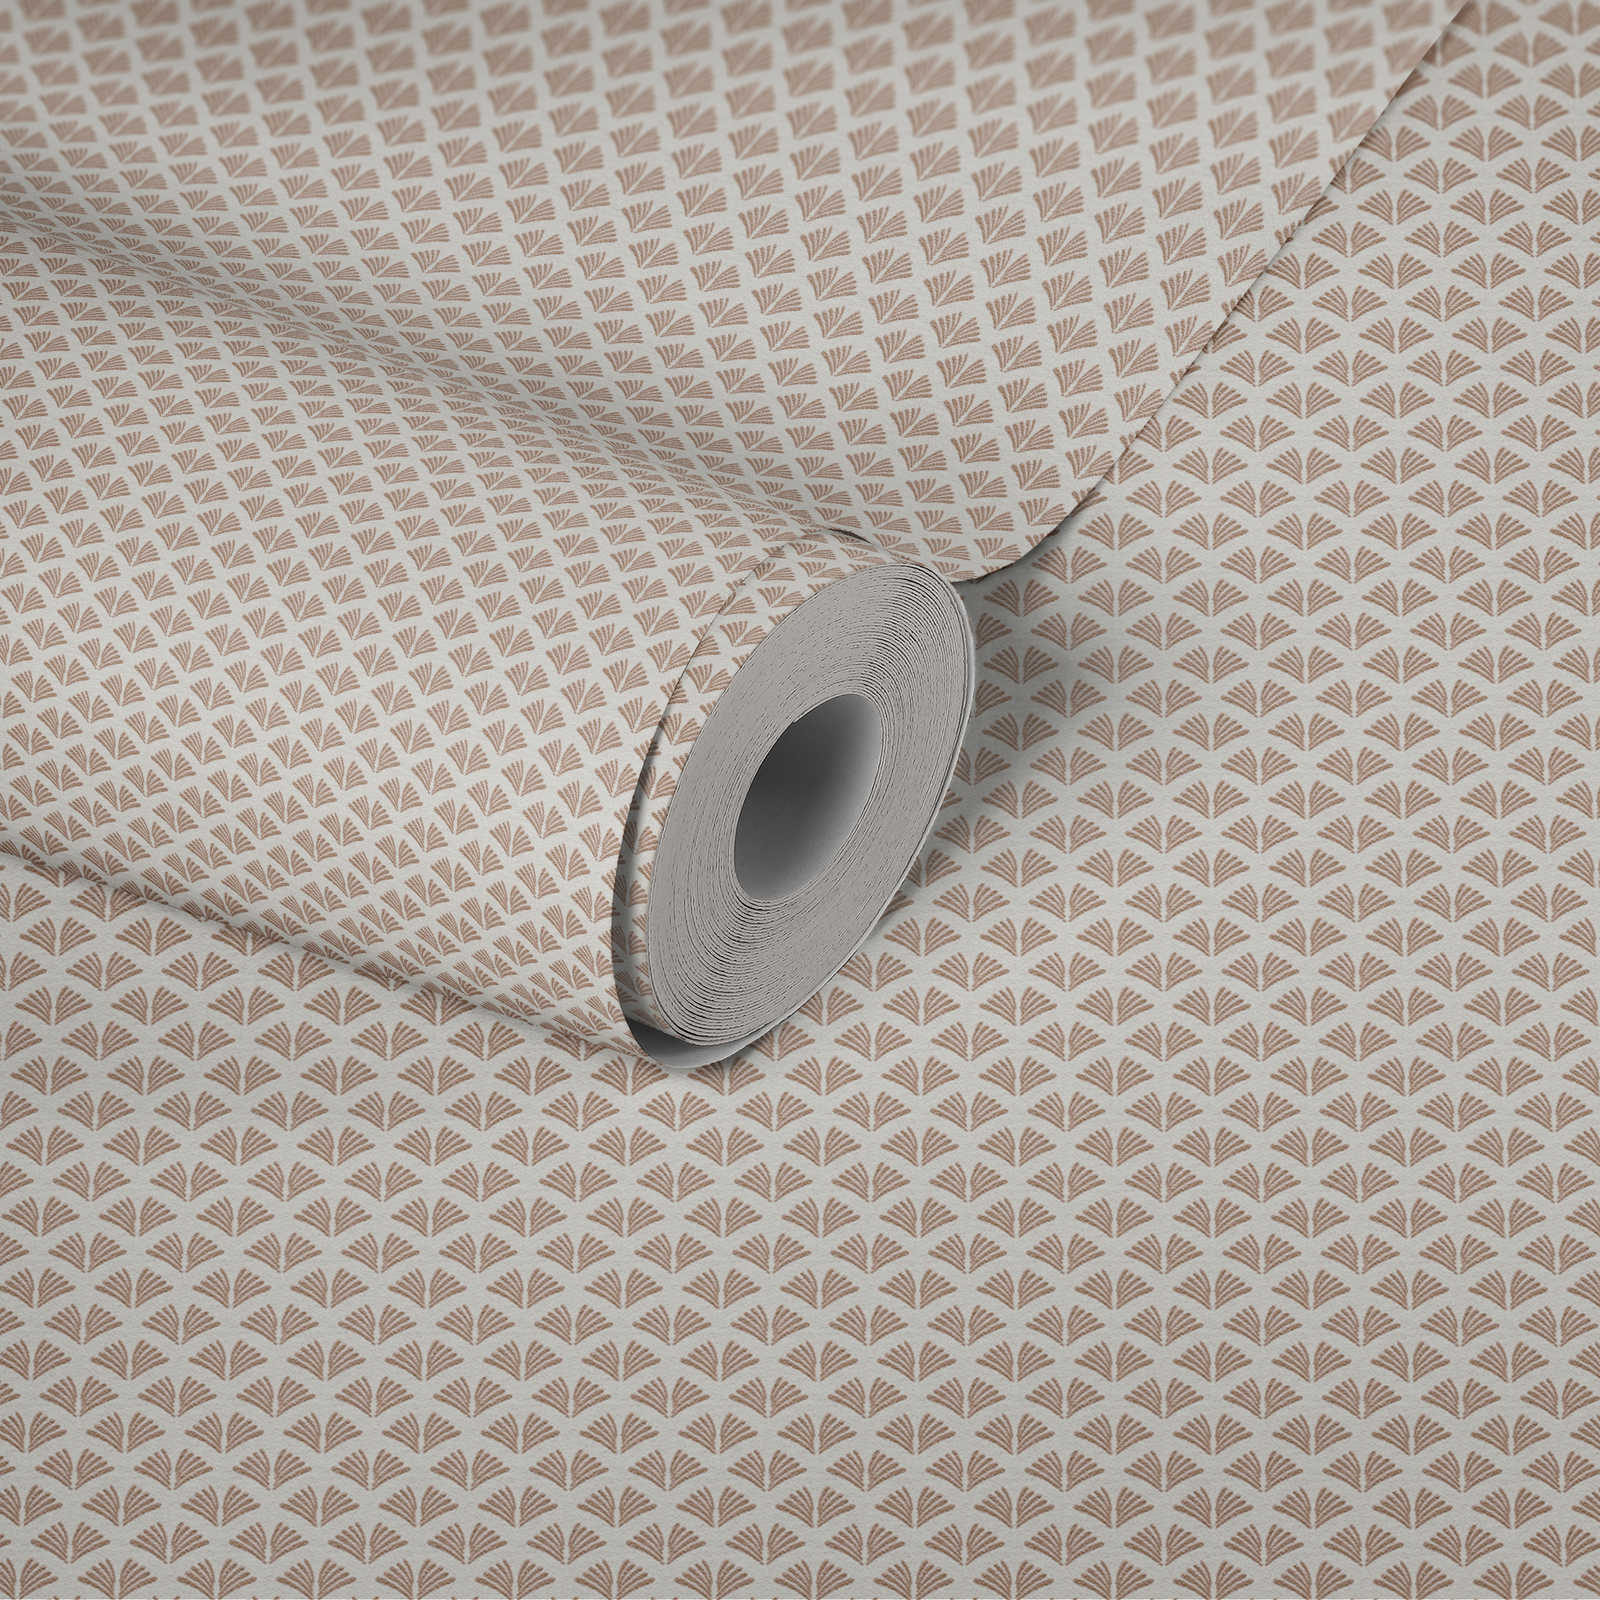             Non-woven wallpaper white with metallic gold pattern for design walls
        